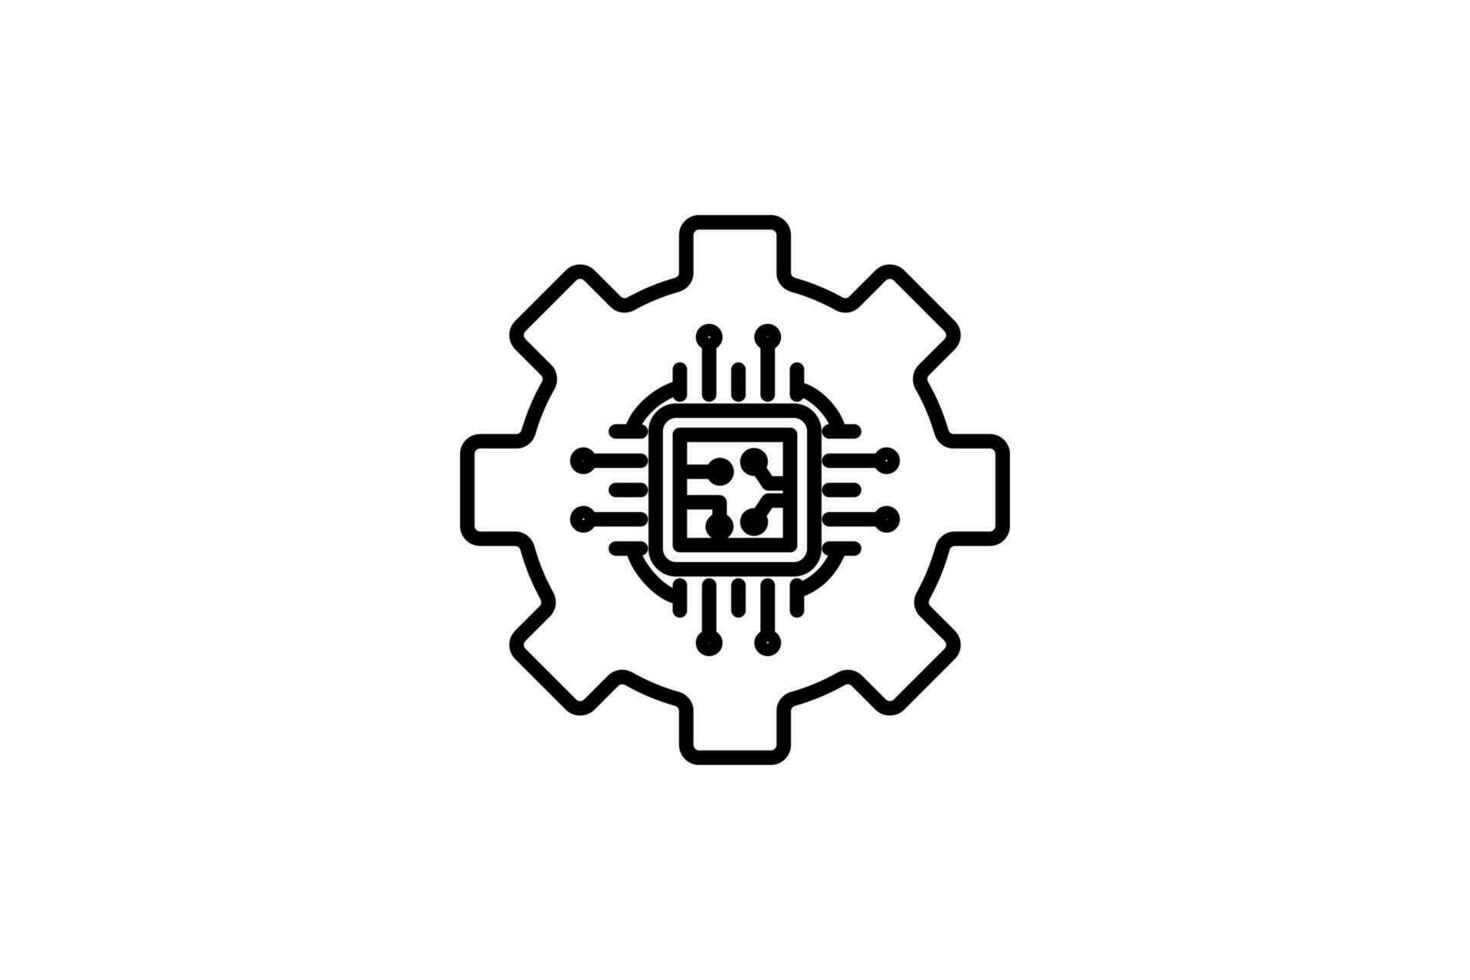 Human centric design icon. human with gears. human welfare, safety, and industrial environments. icon related to industry, technology. line icon style. simple vector design editable